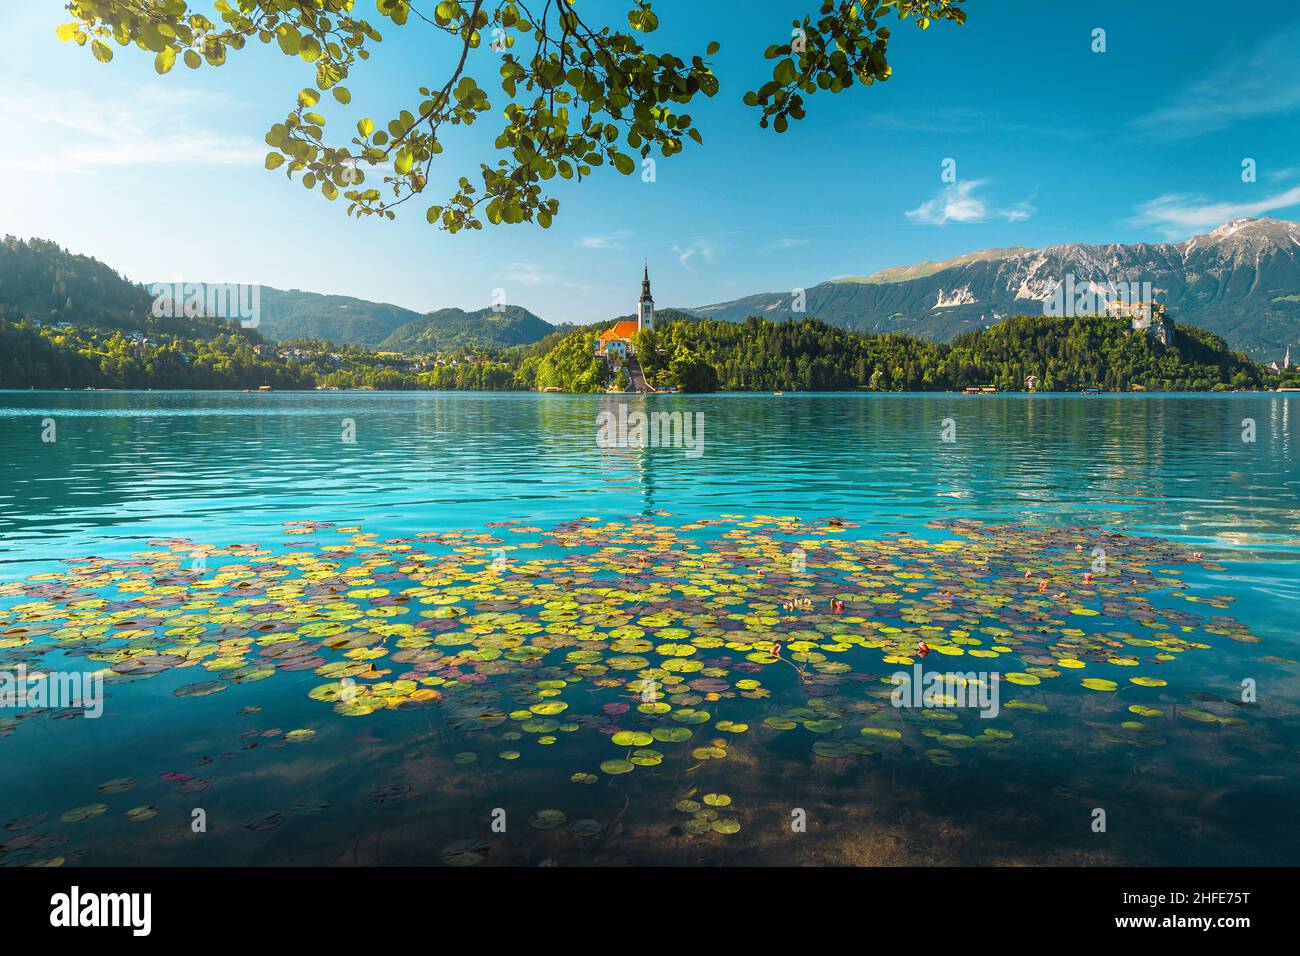 One of the most famous travel destination in Slovenia. Blooming water lily flowers on the lake and cute Pilgrimage church on the island in background, Stock Photo